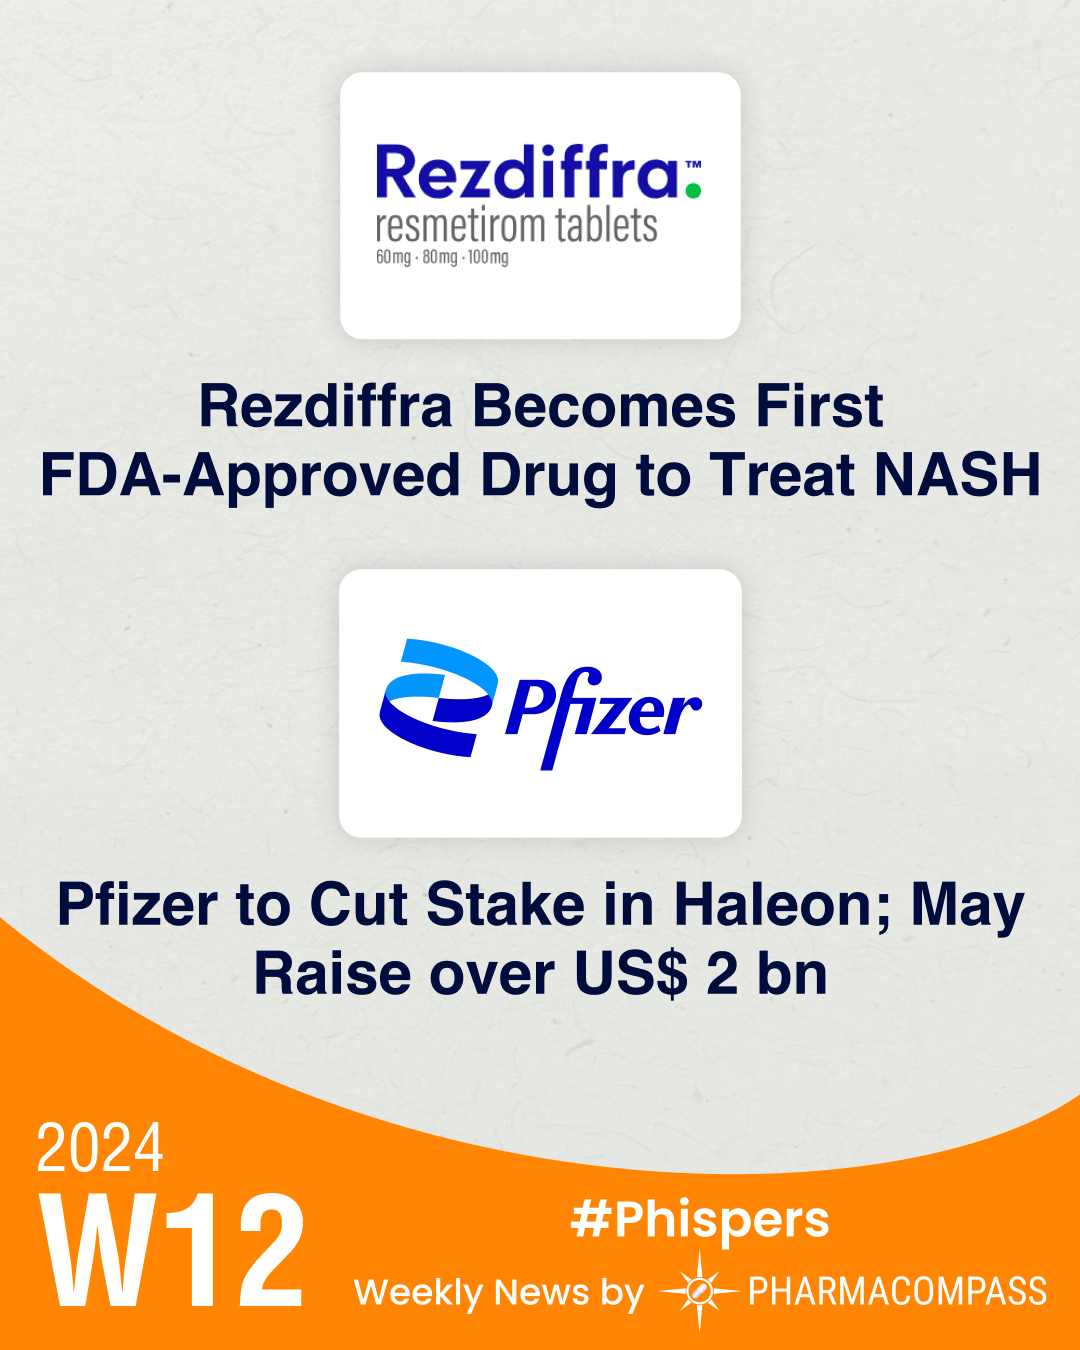 Madrigal’s Rezdiffra becomes first FDA-approved drug to treat NASH; Astra buys Fusion for US$ 2.4 bn